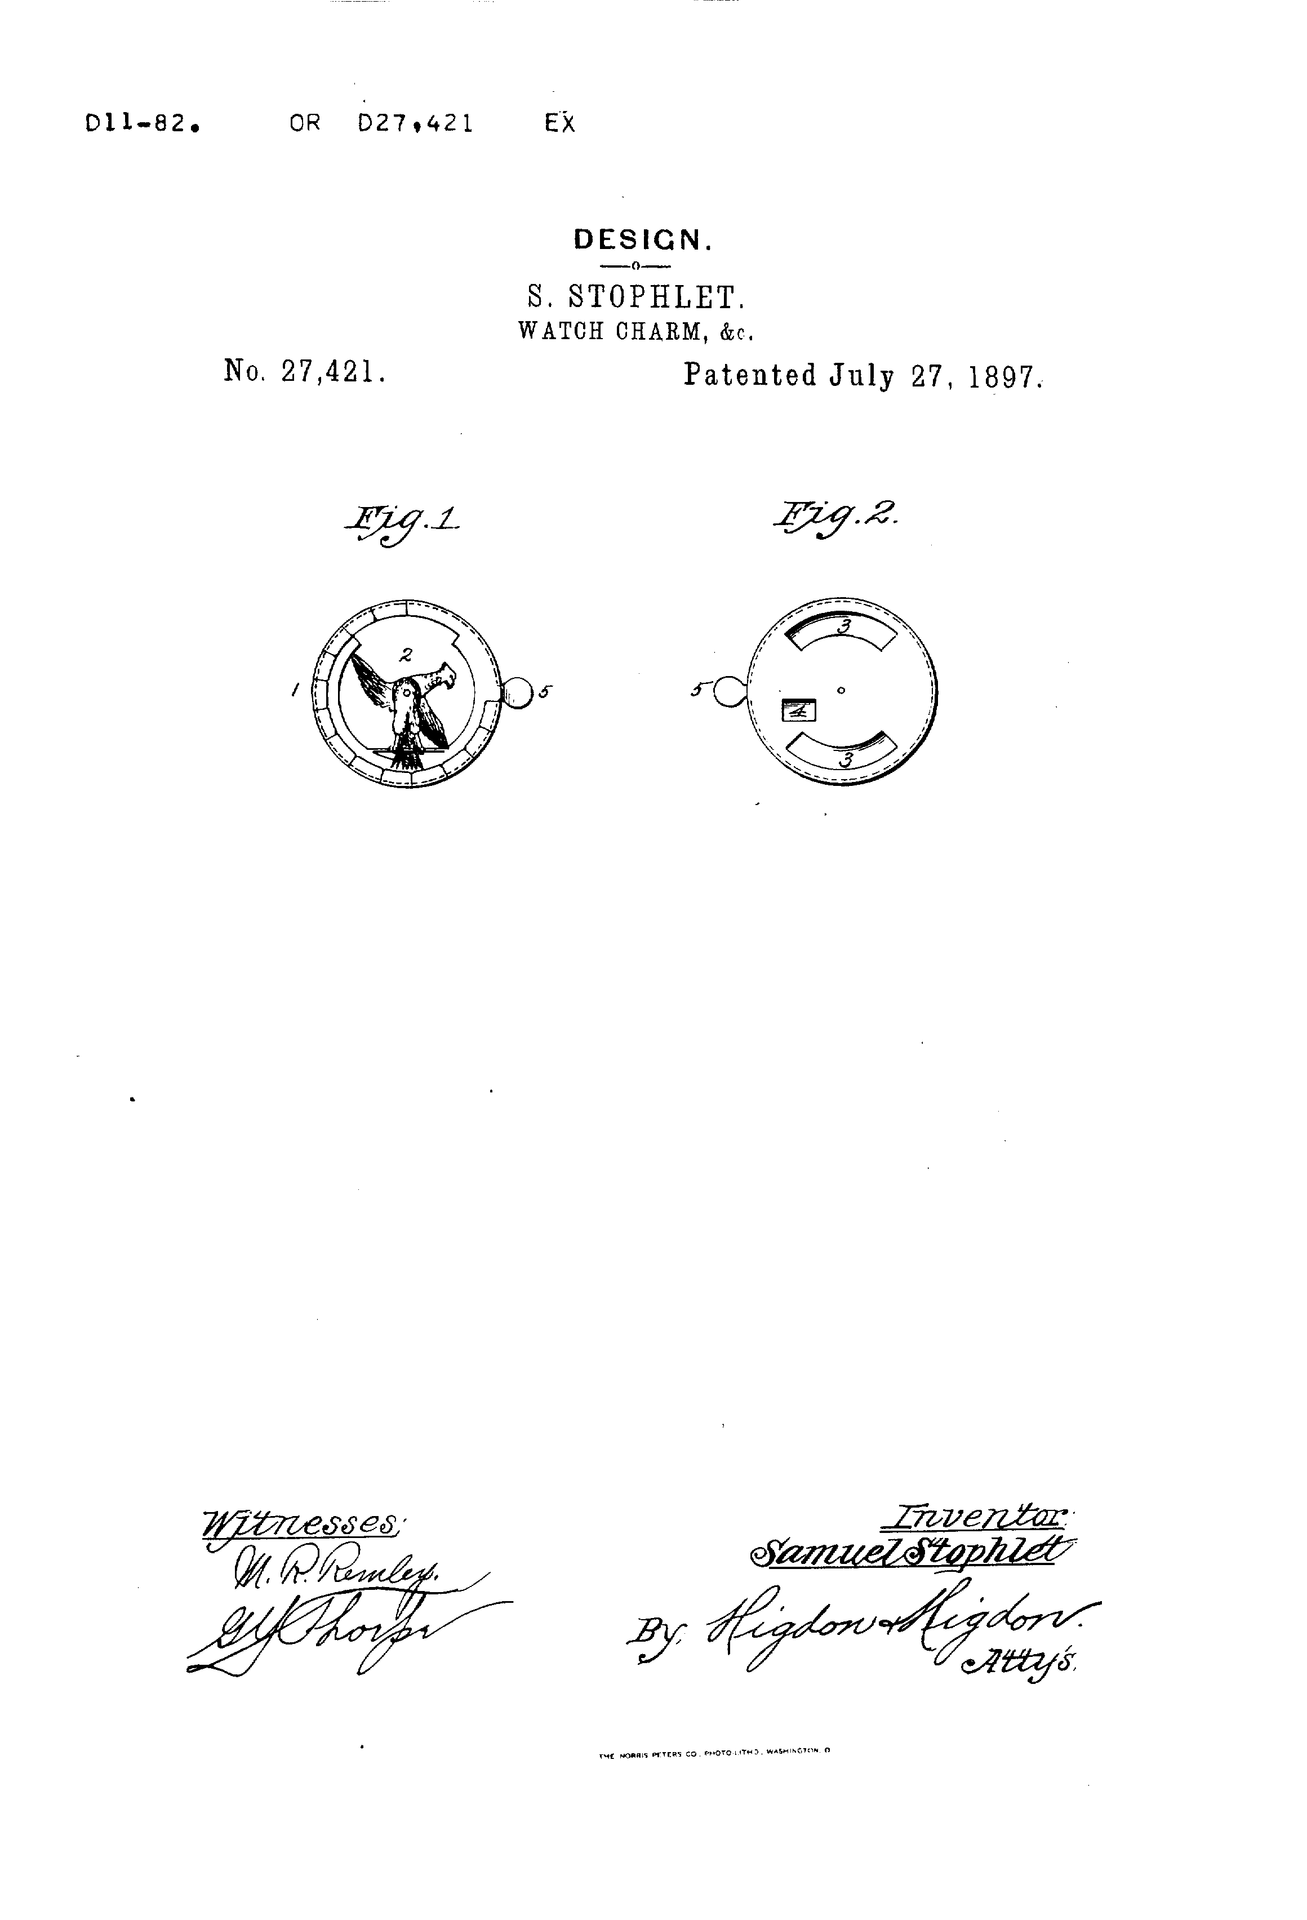 US Patent filed 7-27-1897 - USD27421-0.png